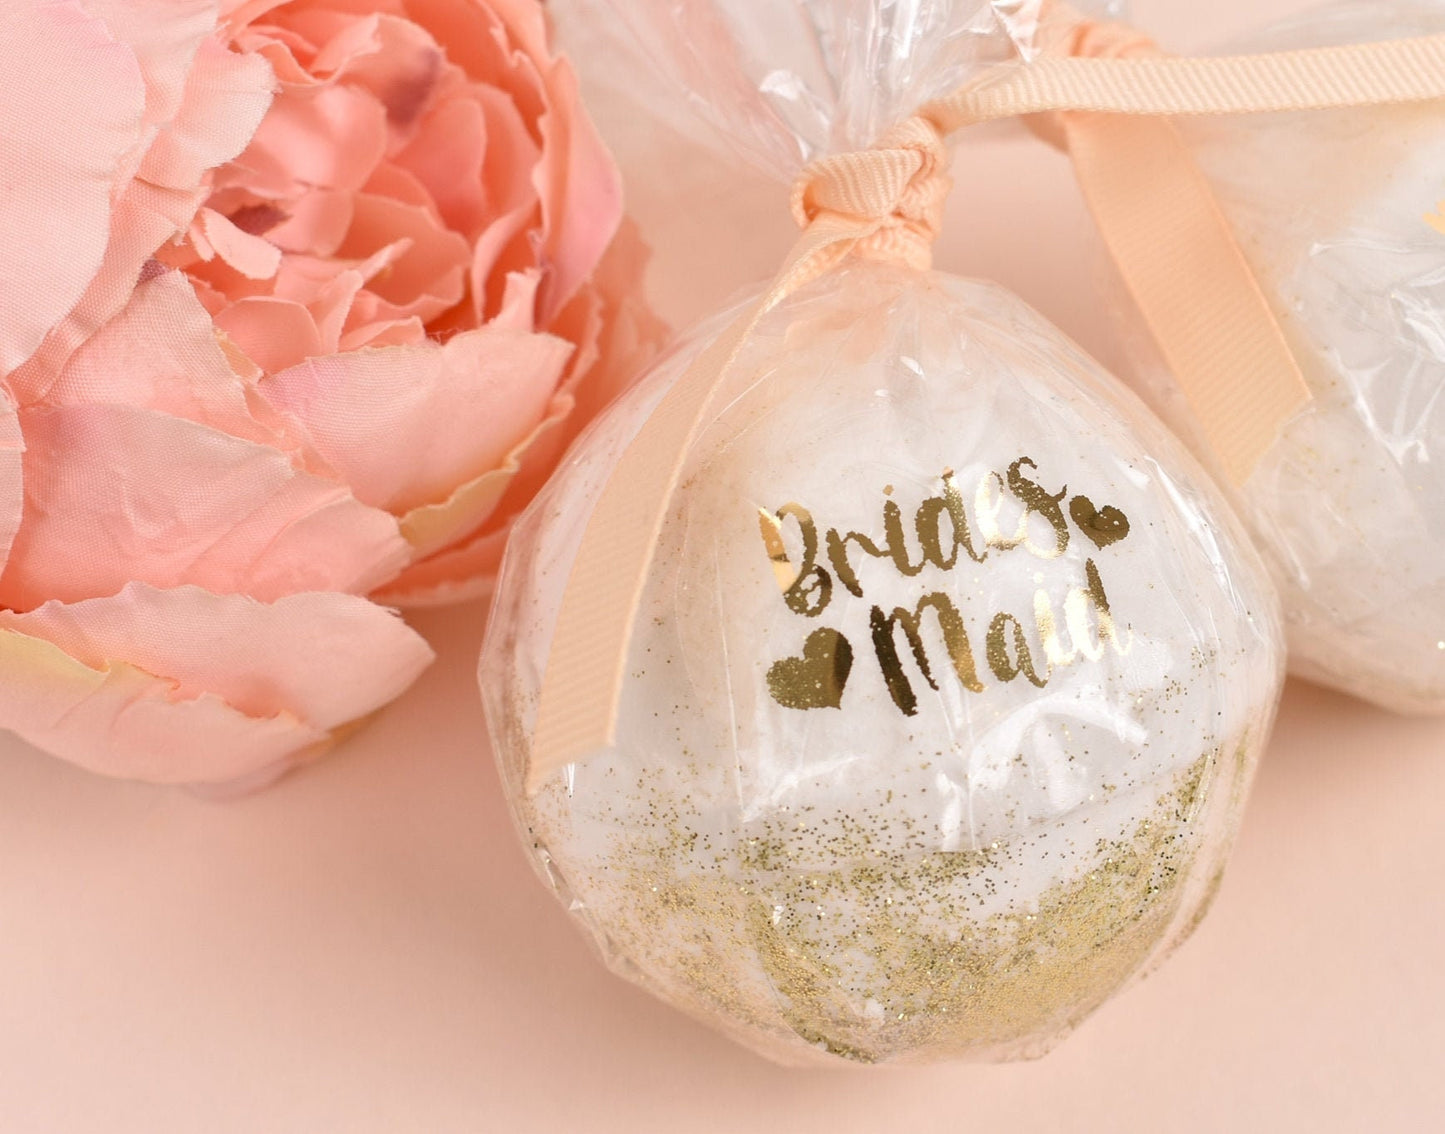 Bridesmaid Gift Proposal Gold Bath Bomb Bridesmaid Proposal Bath Bomb Cheap Bridesmaid Proposal Gifts Personalized Bridesmaid Gift Rose Gold